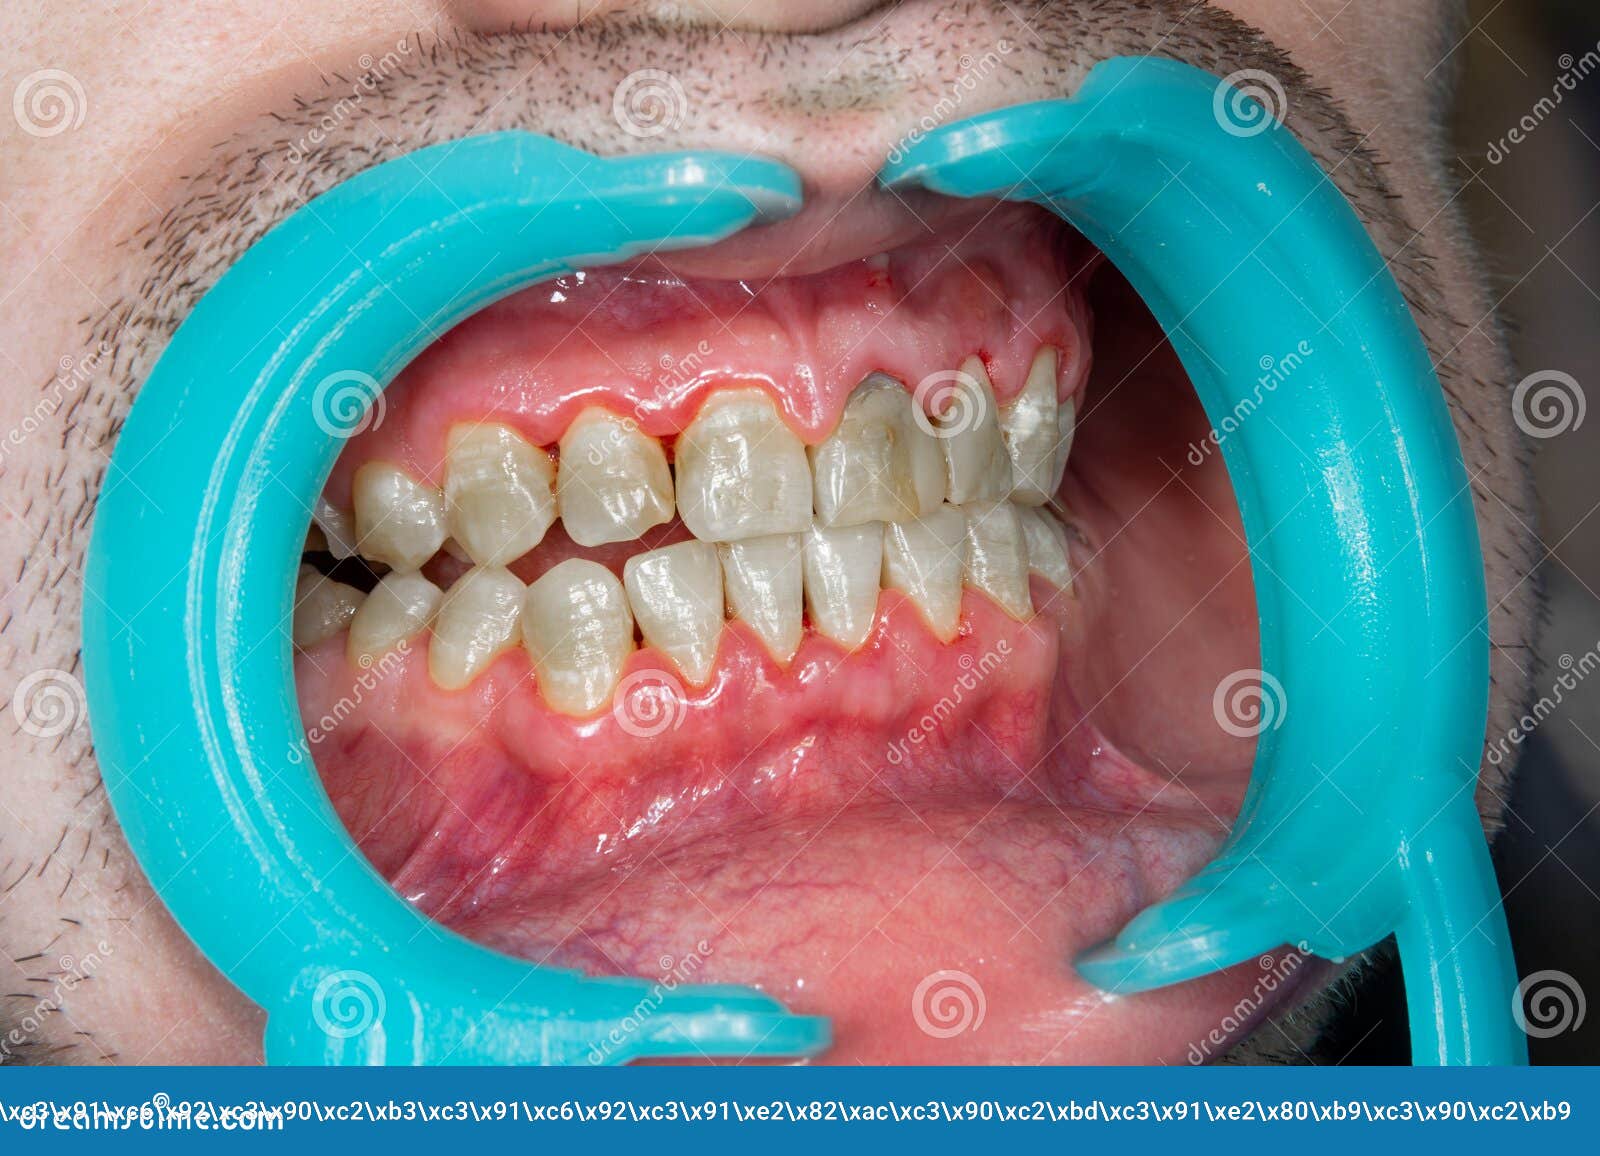 human teeth closeup with dental plaque and inflammation of gingivitis. concept of brushing teeth and poor hygiene